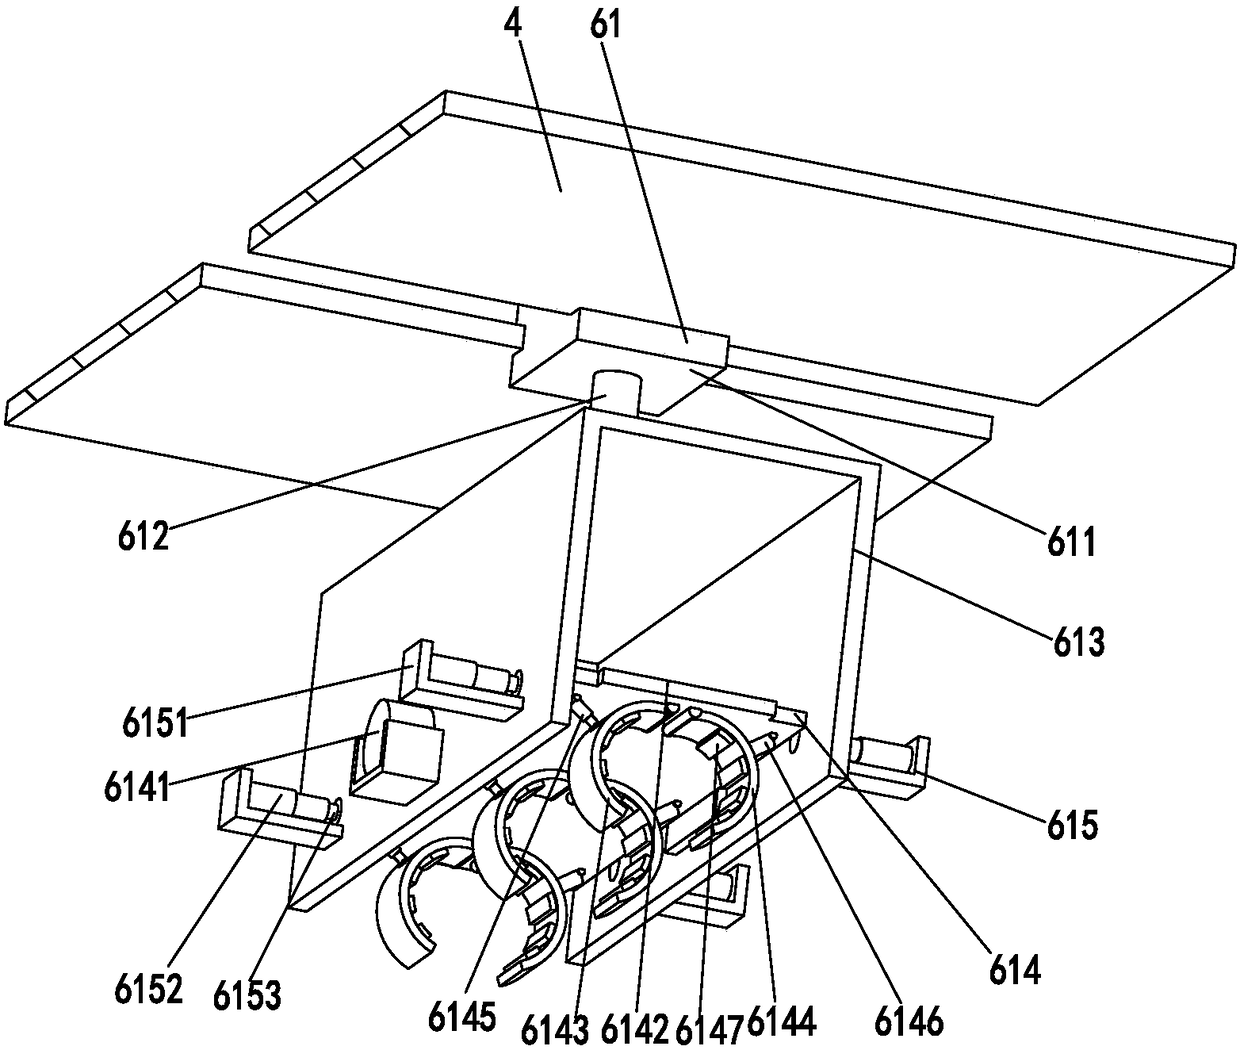 Automatic installation device for architectural engineering